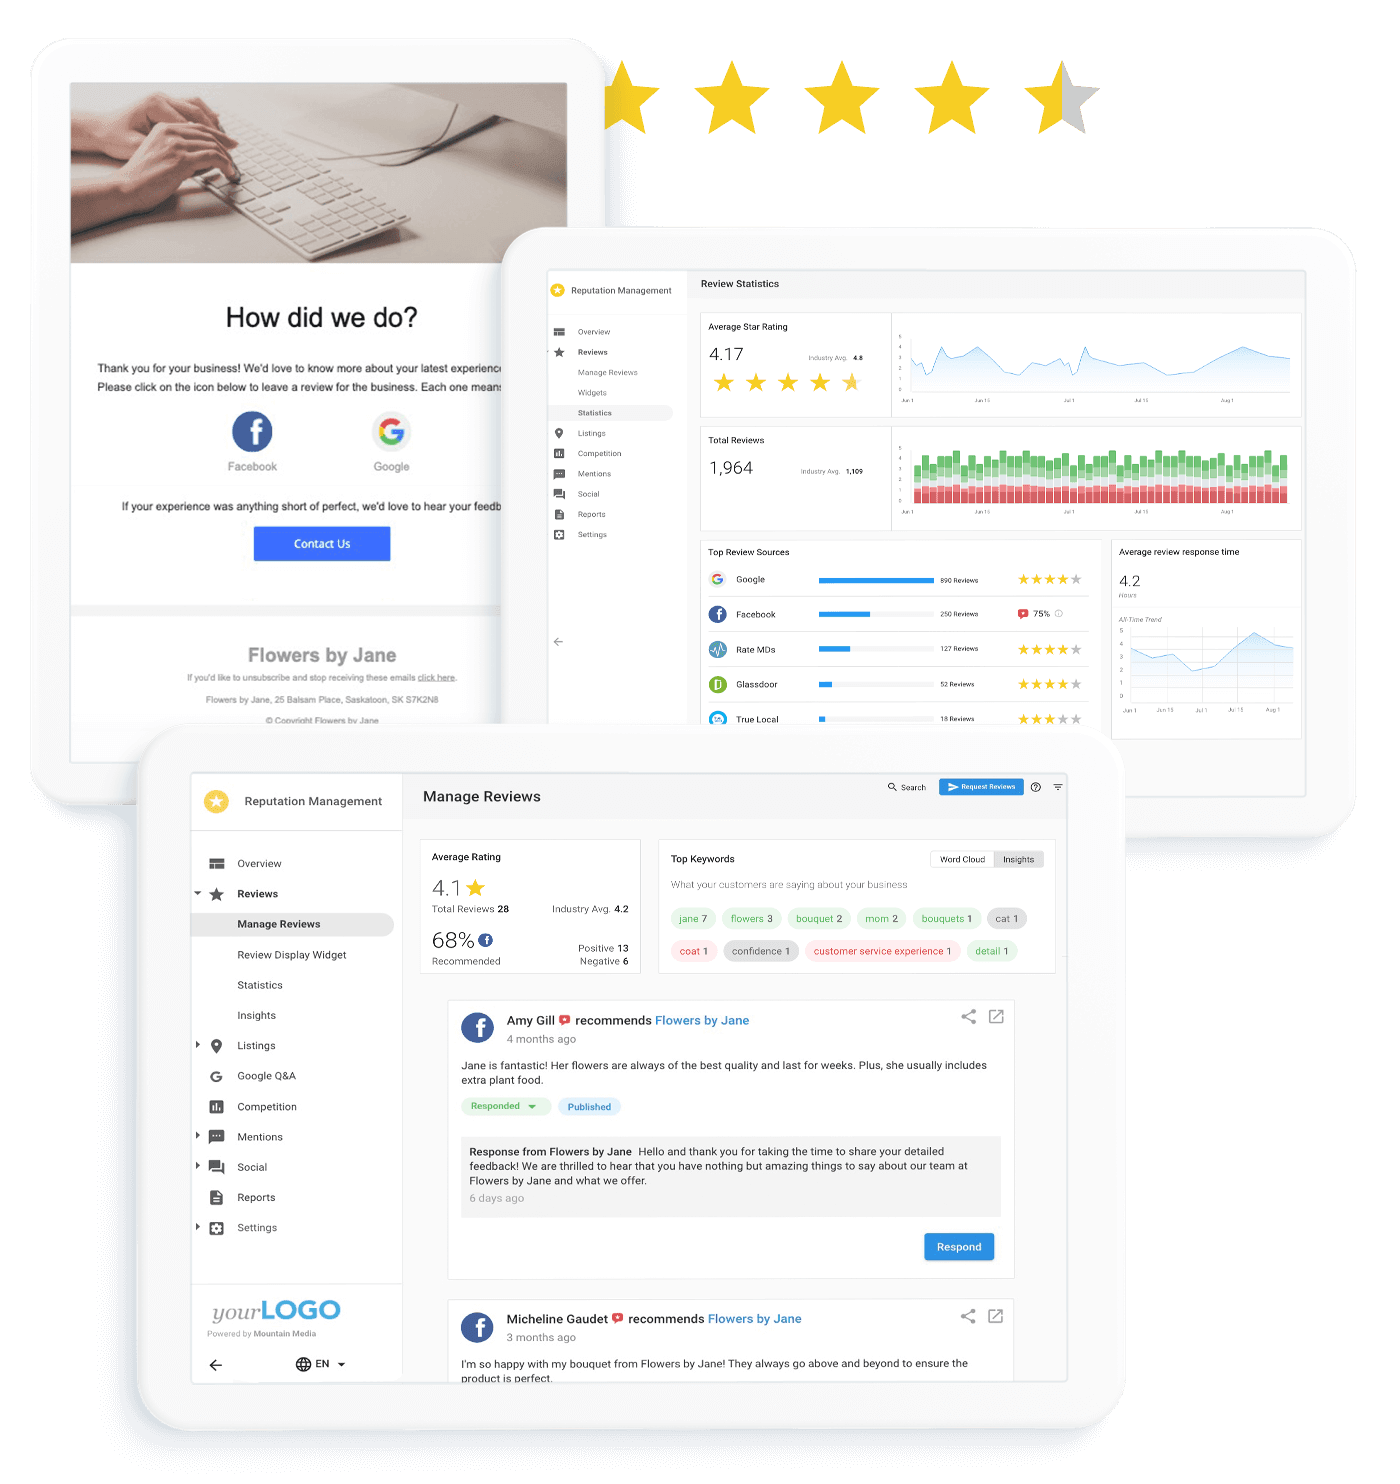 Stay on top of what your customers are saying about you and why.   Monitor and manage all aspects of your online reputation, including listings, reviews, mentions and more.   Manage your reviews from multiple review sites in one place.   Stay on top of your review on all of the most popular review sites, including Facebook, Google+, and Yelp as well as a ton of sites that are relevant to your specific industry. Also, easily respond with 40+ curated responses, and gain critical insights into what your customers are saying most often and why.   View the accuracy of your business listing data across the web.   Improve your search rank by identifying online business listings that are inaccurate or missing from essential directories like Google, Facebook, Bing and 60+ others.